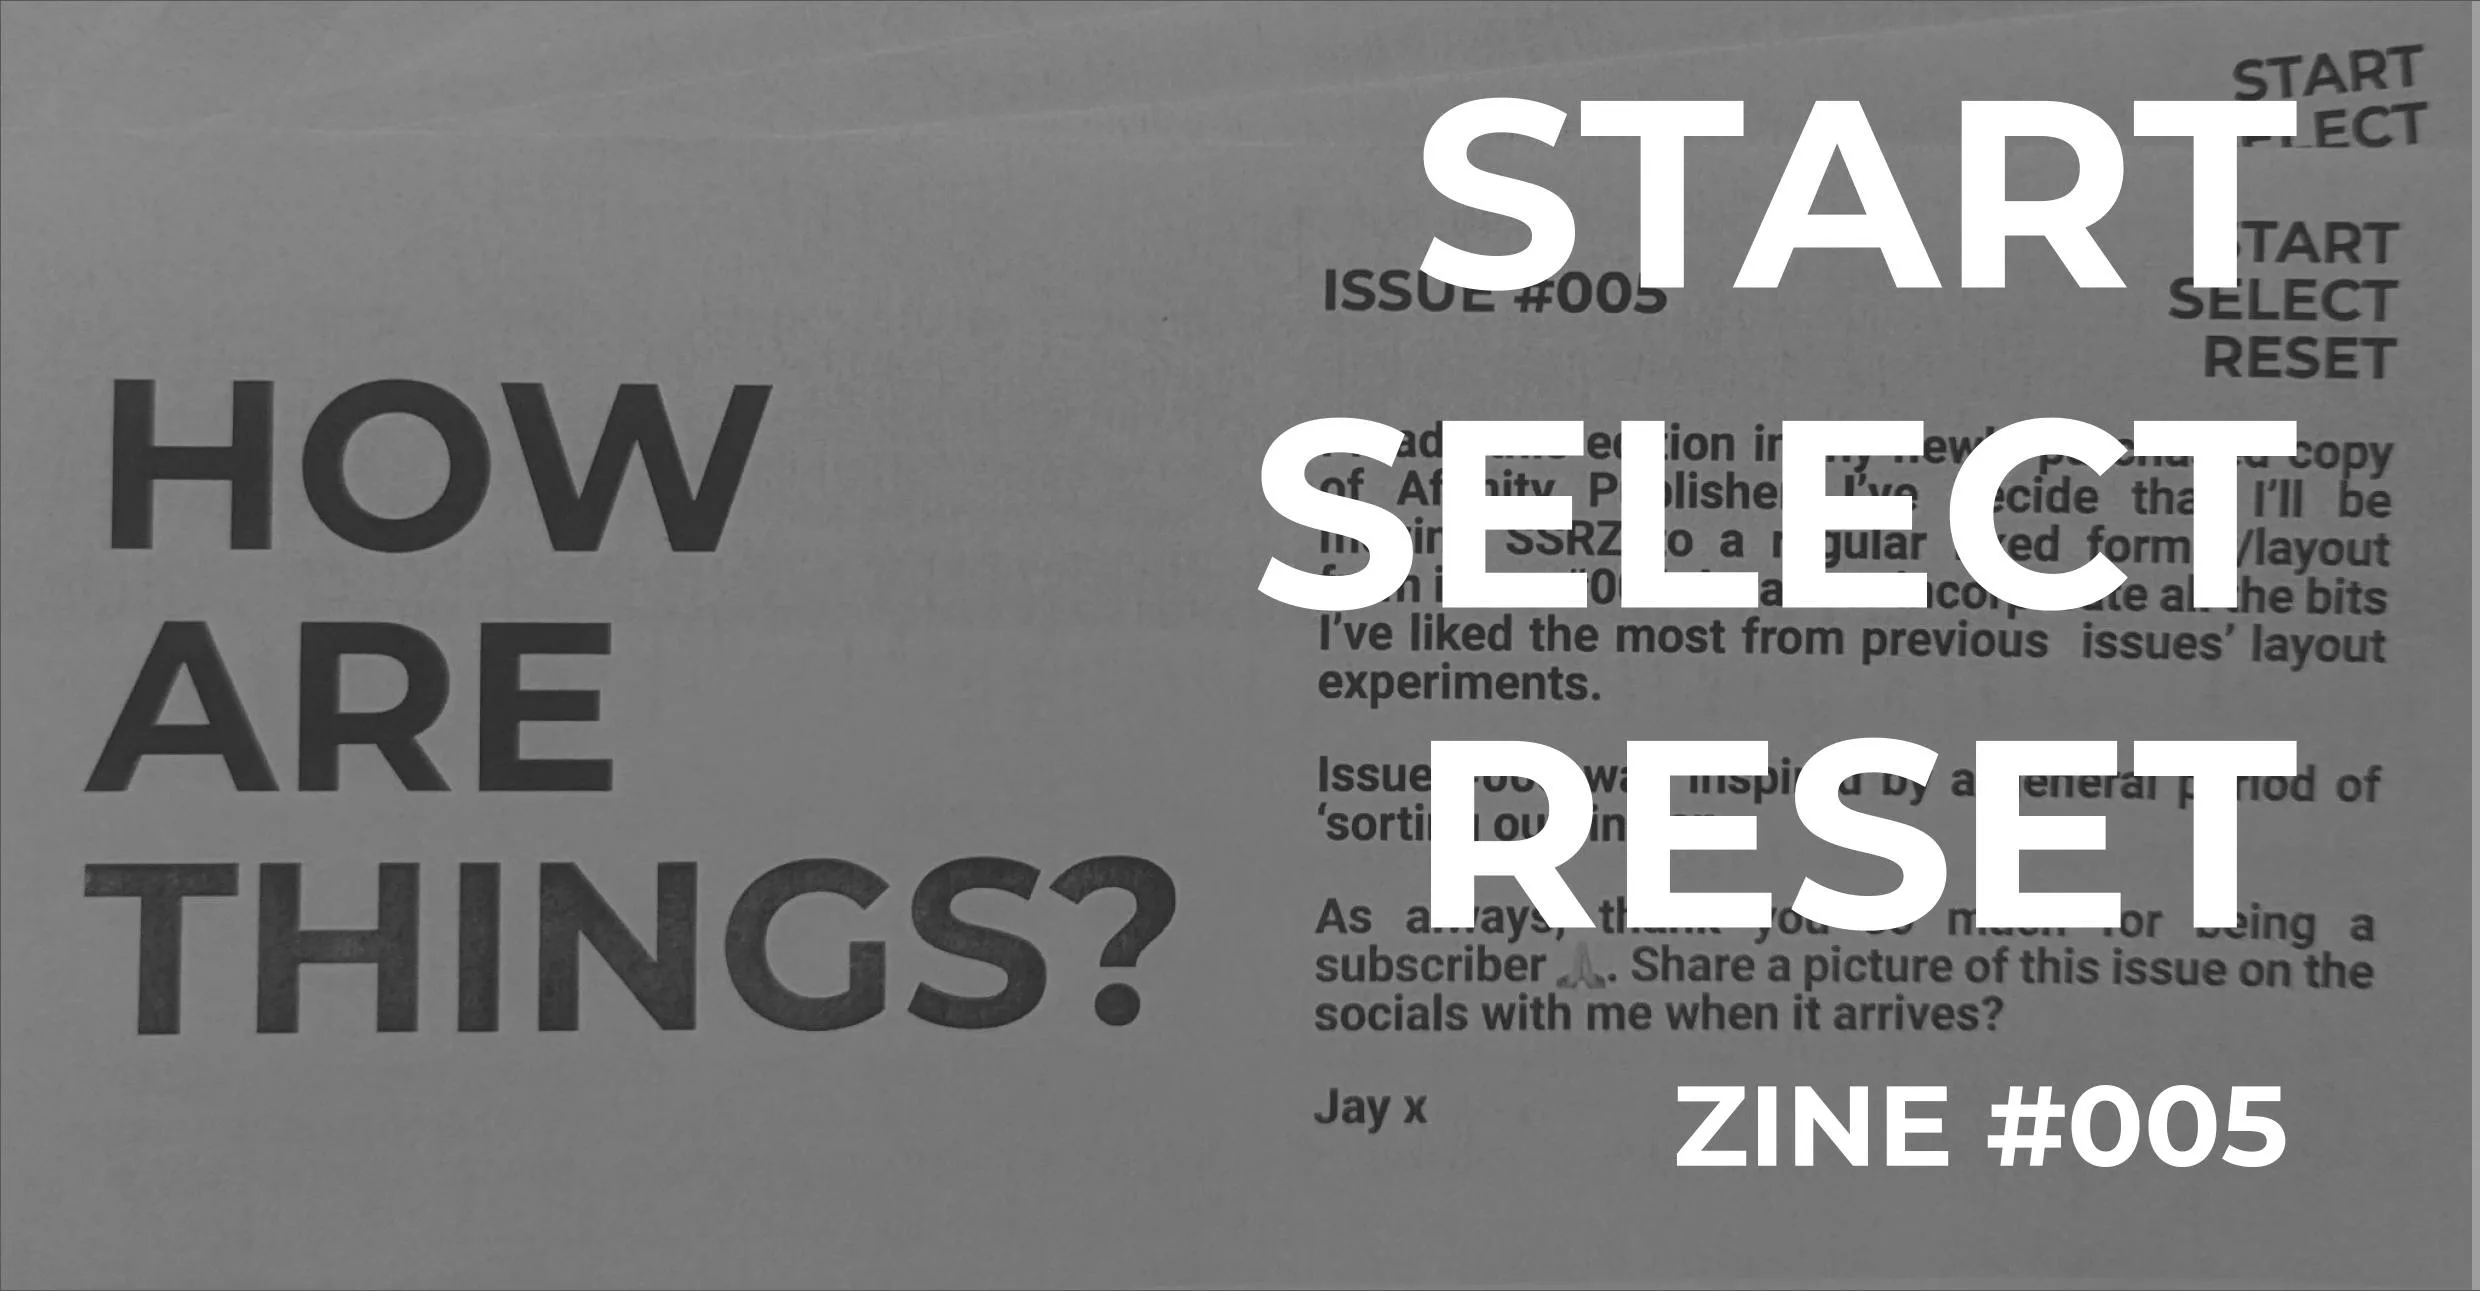 Start Select Reset Zine – How Are Things?